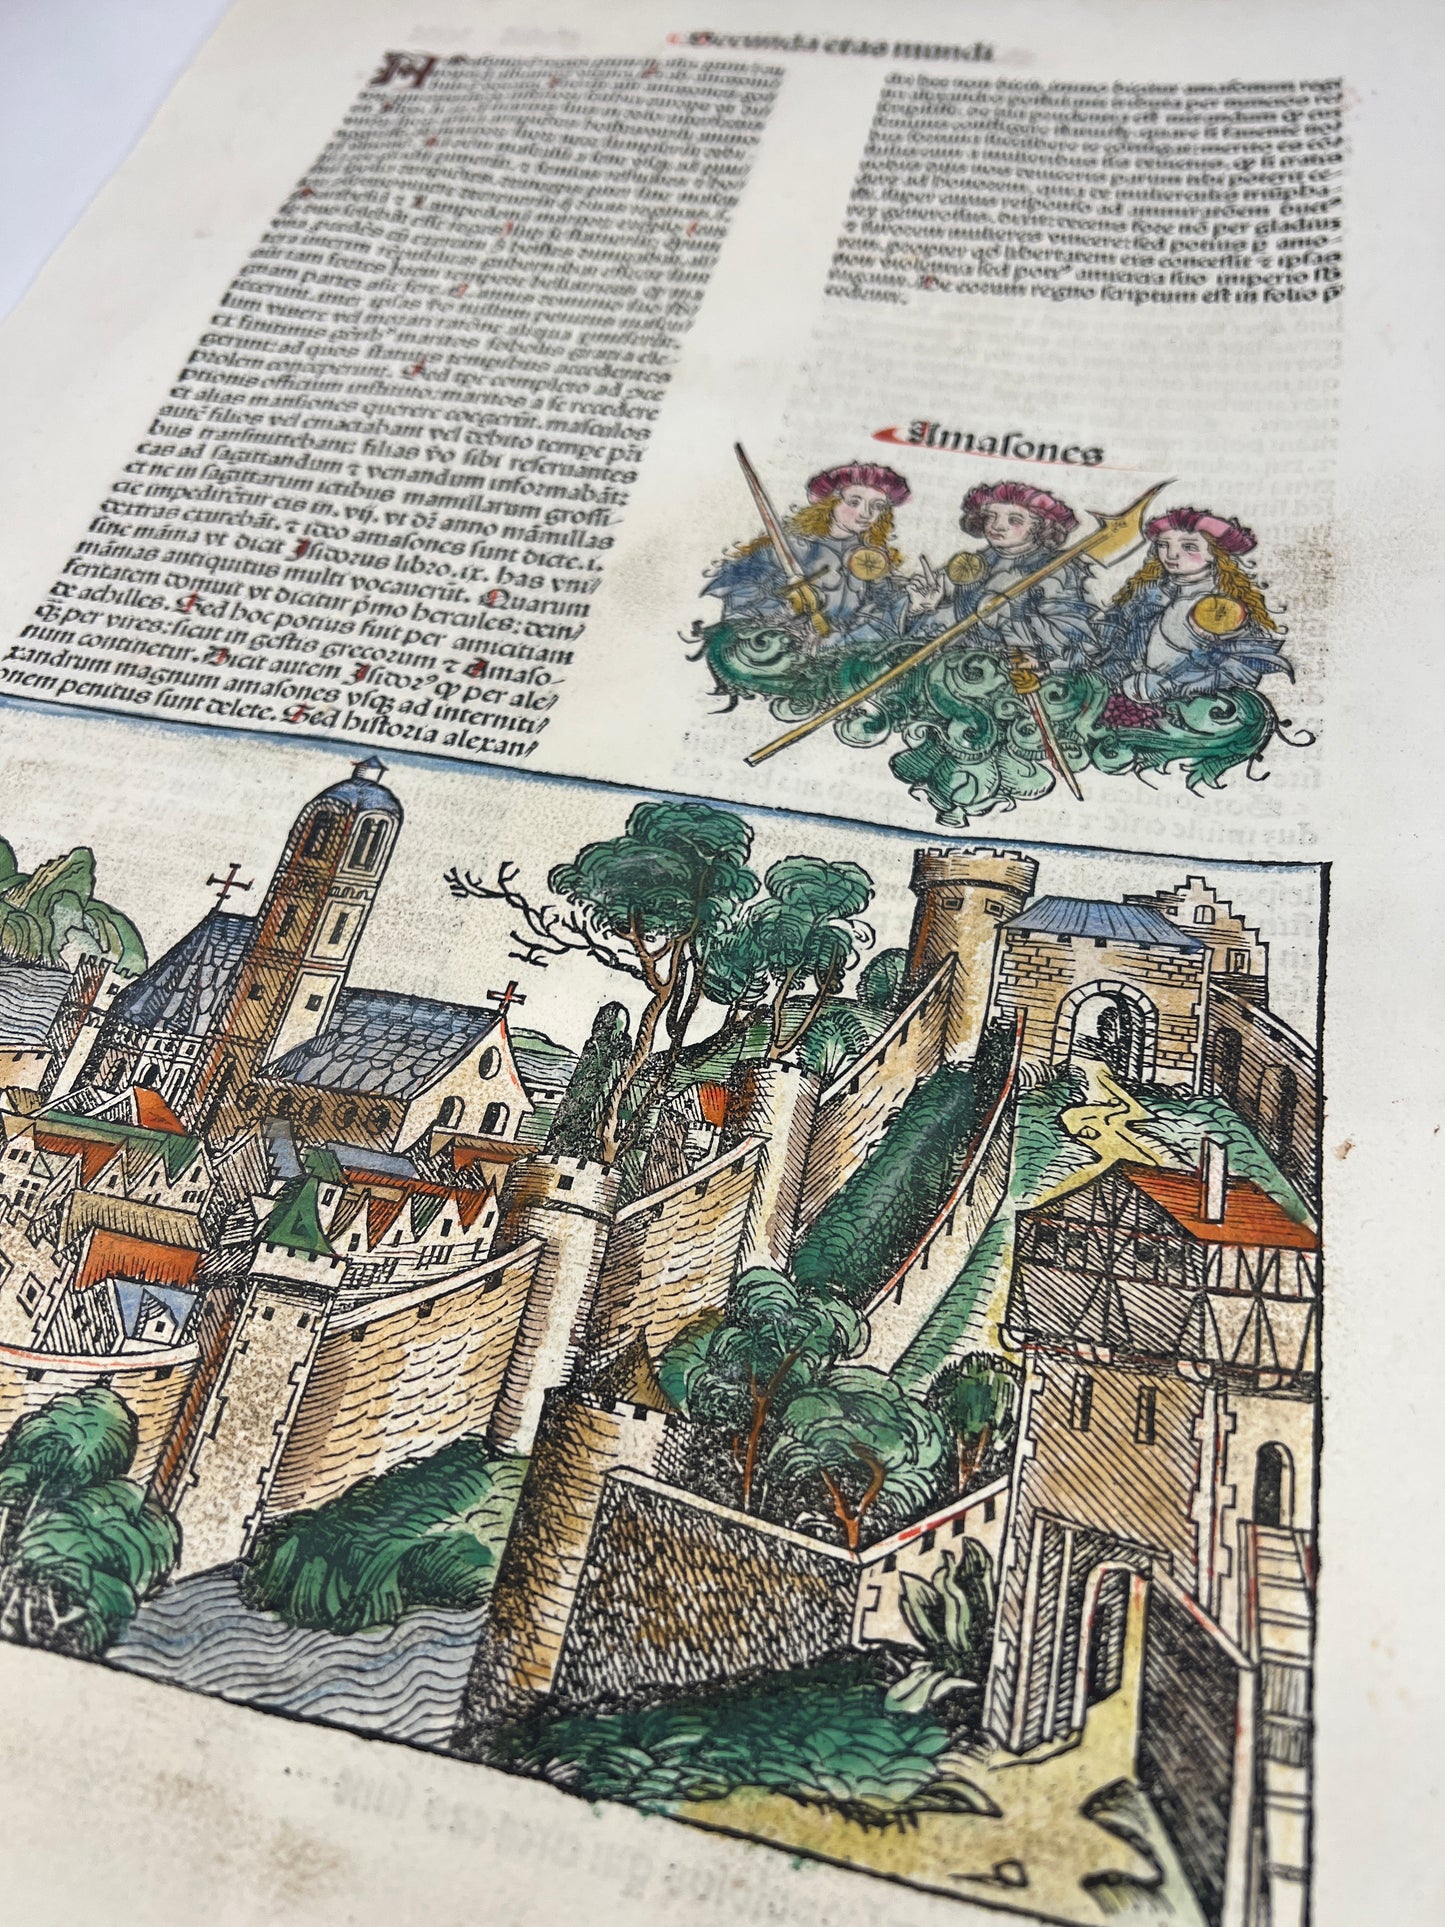 1493 Incunabula Leaf From the Nuremberg Chronicle of Hartmann Schedel - Ancient Amazonian City